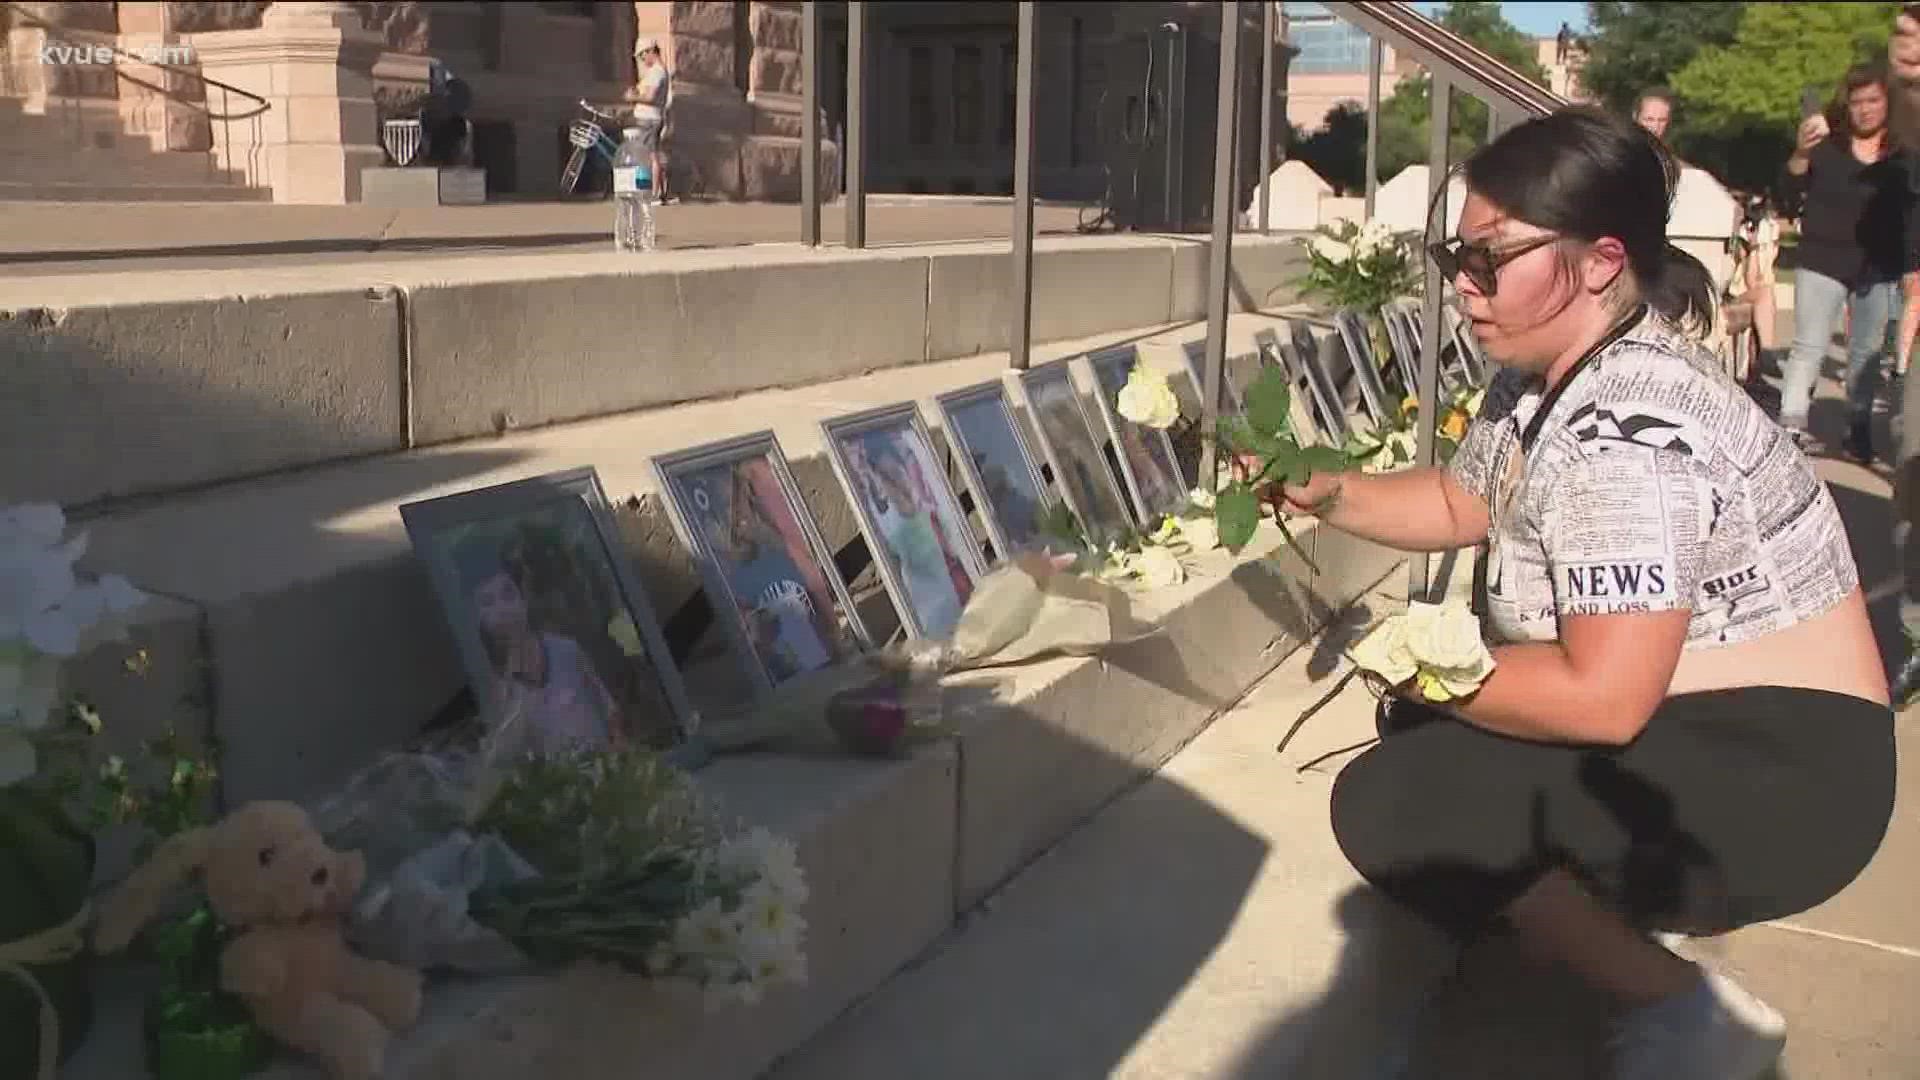 Outside the Texas Capitol on Wednesday, there was a vigil honoring those who were killed in the shooting.